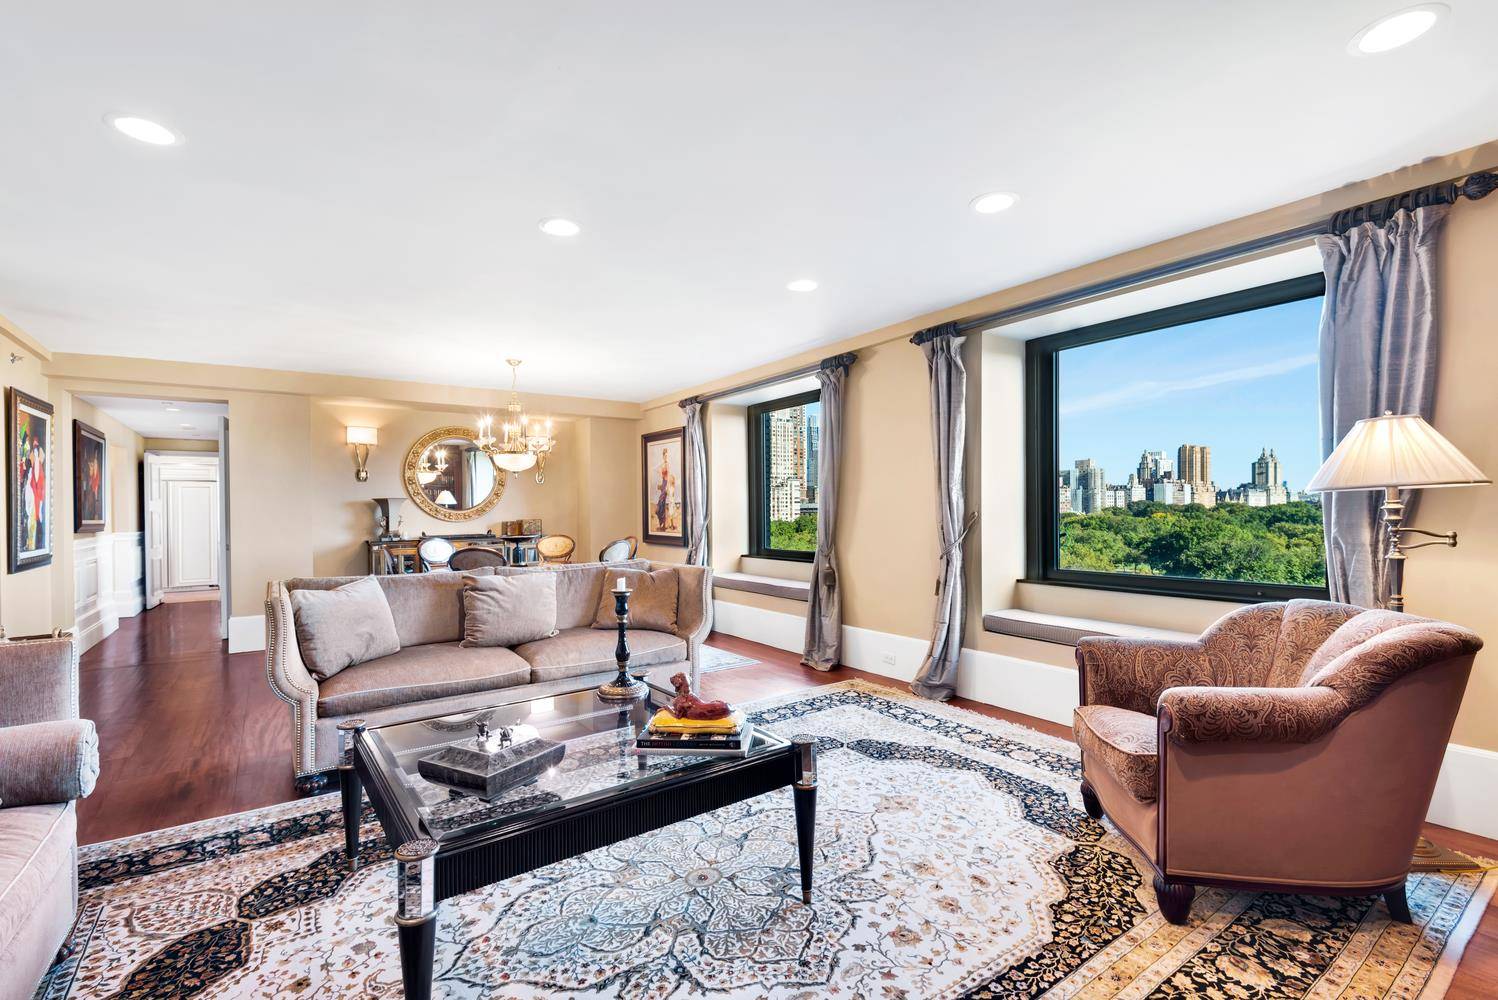 Welcome to the most magnificent listing with forever protected Central Park views.